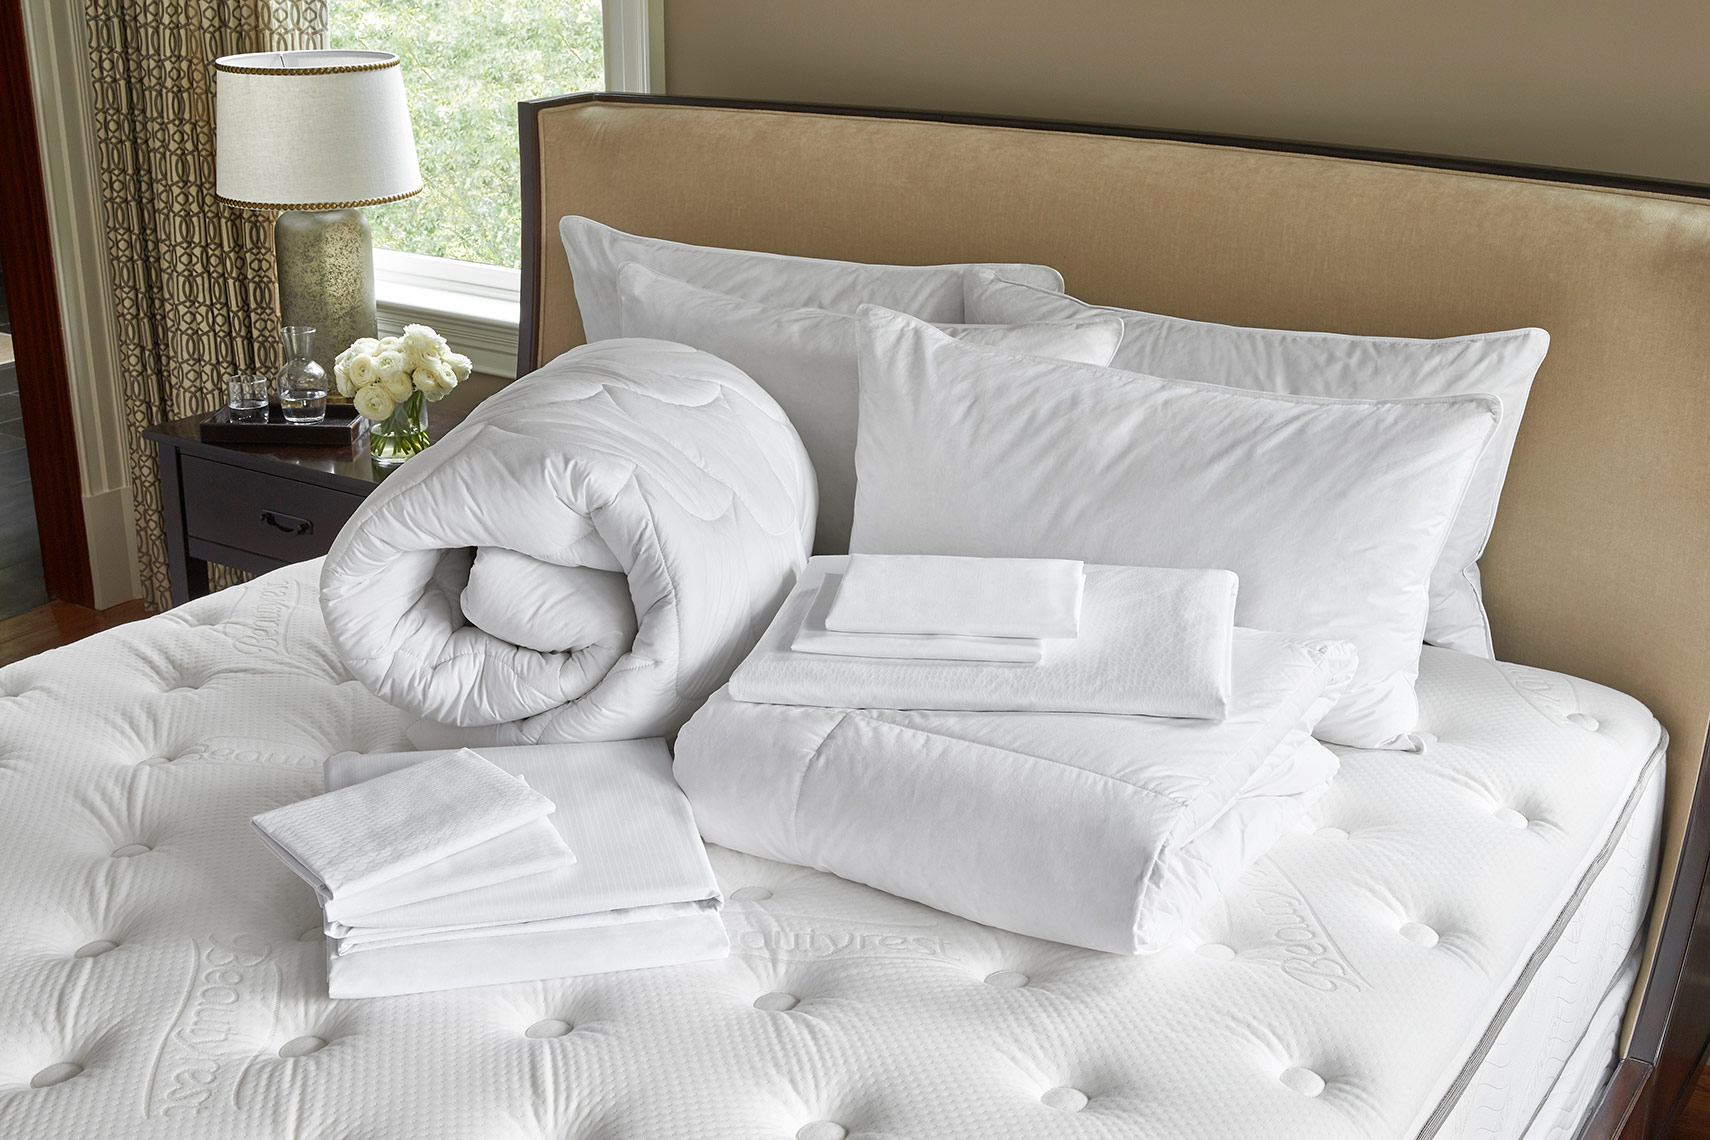 HOTELS-ShopJW22-Pisces-Bed-and-Bedding-Set